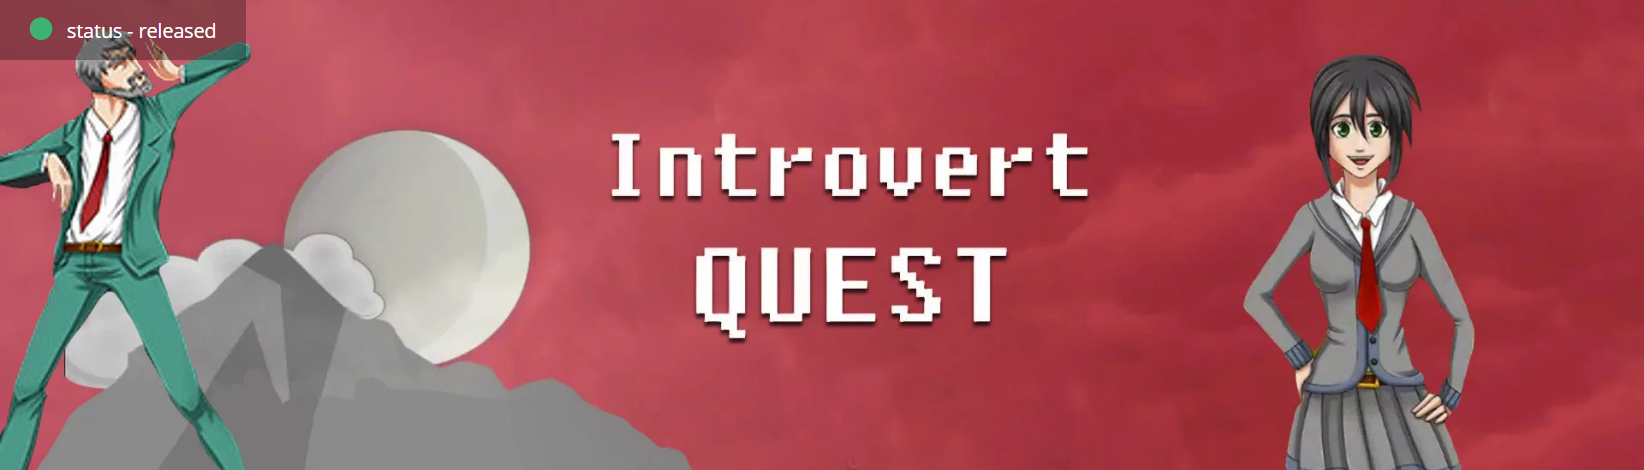 Screenshot_2019-10-05 Introvert Quest Indiegala Developers.png